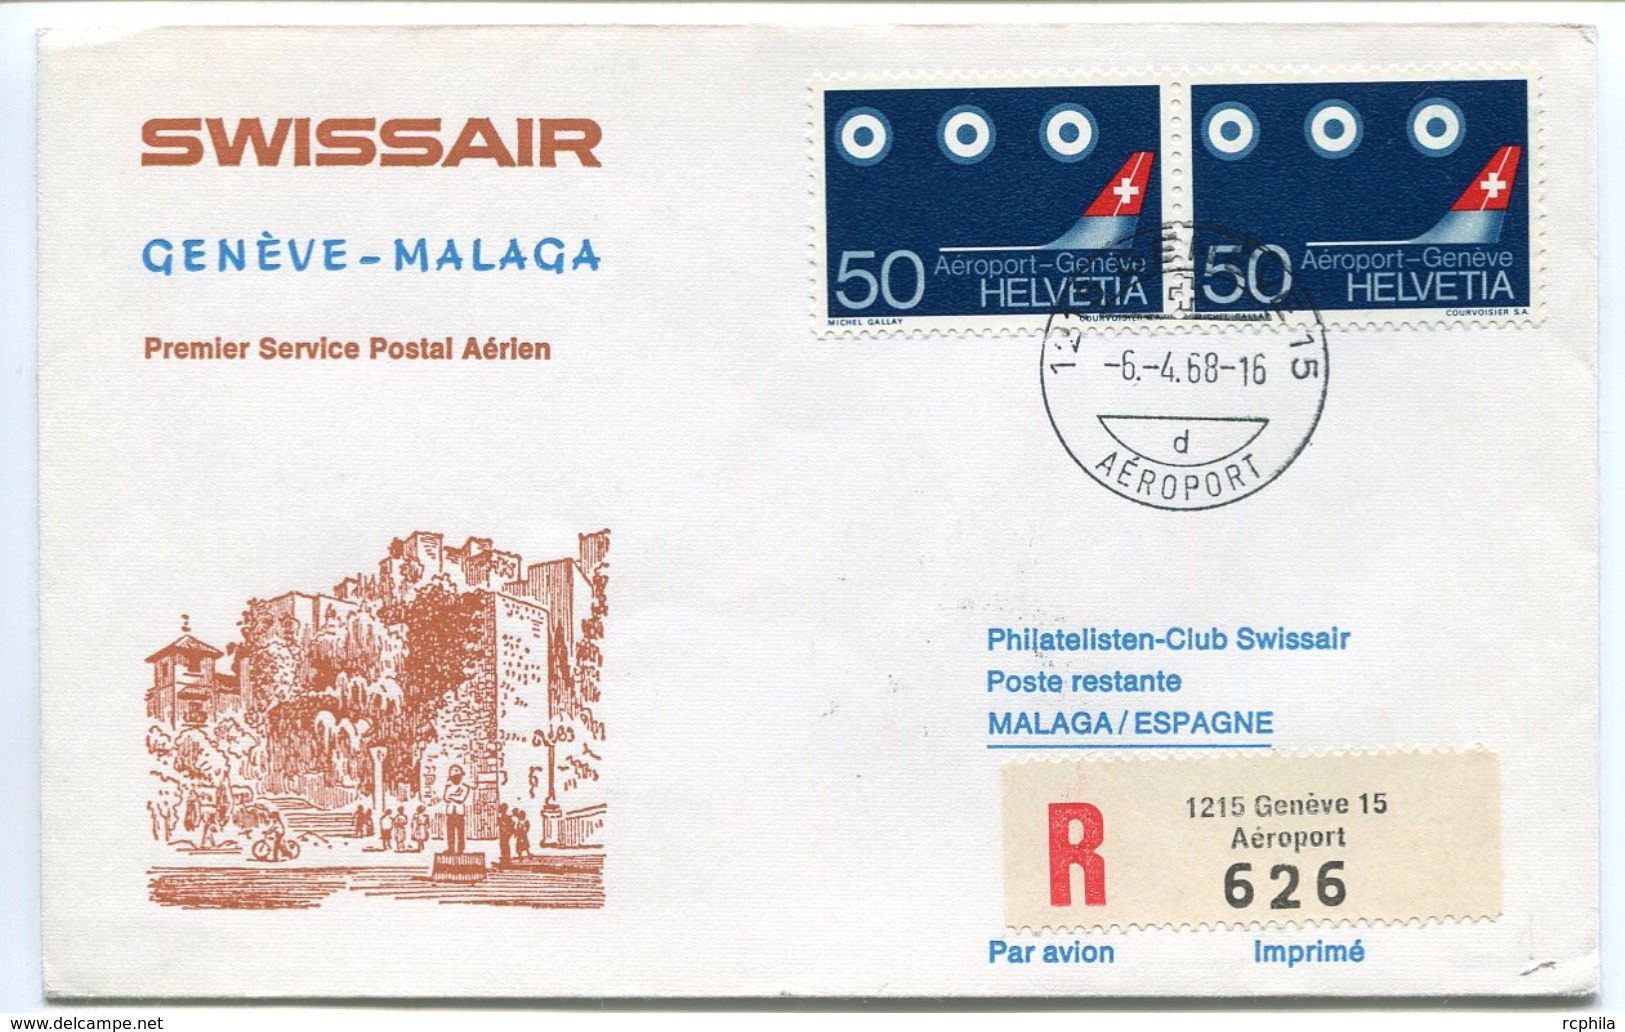 RC 6614 SUISSE SWITZERLAND 1968 1er VOL SWISSAIR GENEVE - MALAGA ESPAGNE FFC LETTRE COVER - First Flight Covers